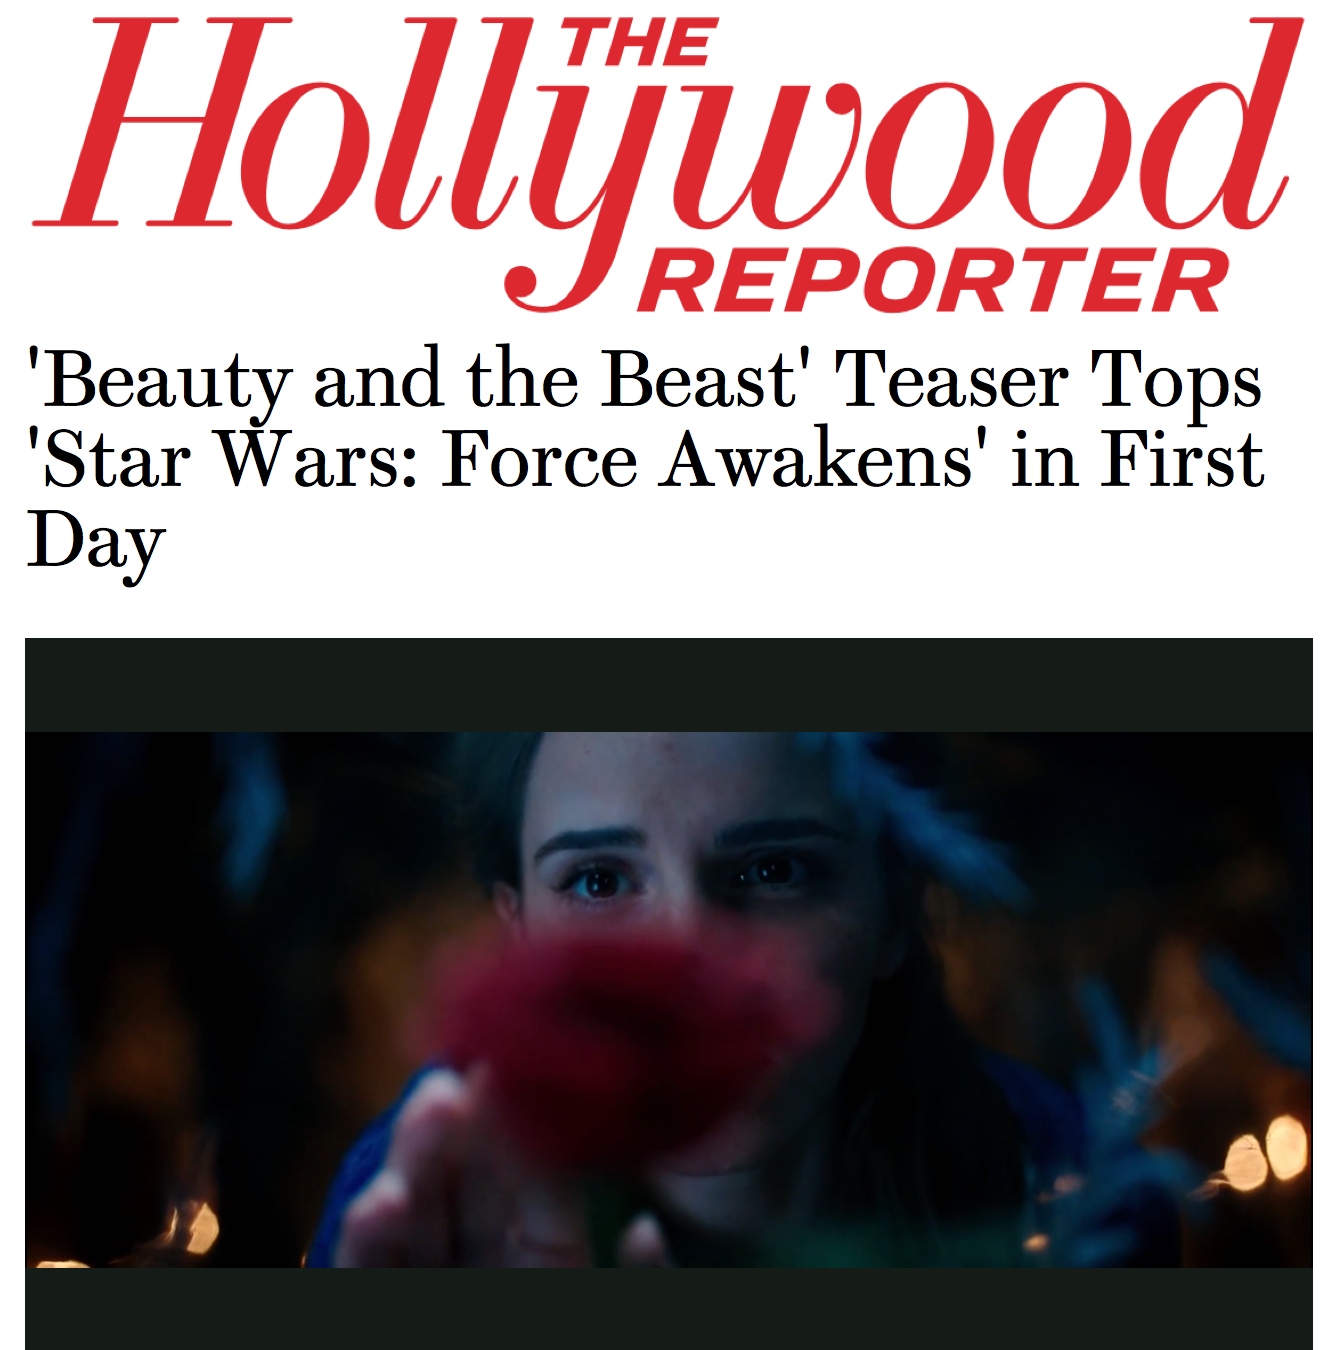 Hollywood Reporter Article on Beauty and The Beast Beating Star Wars Trailer